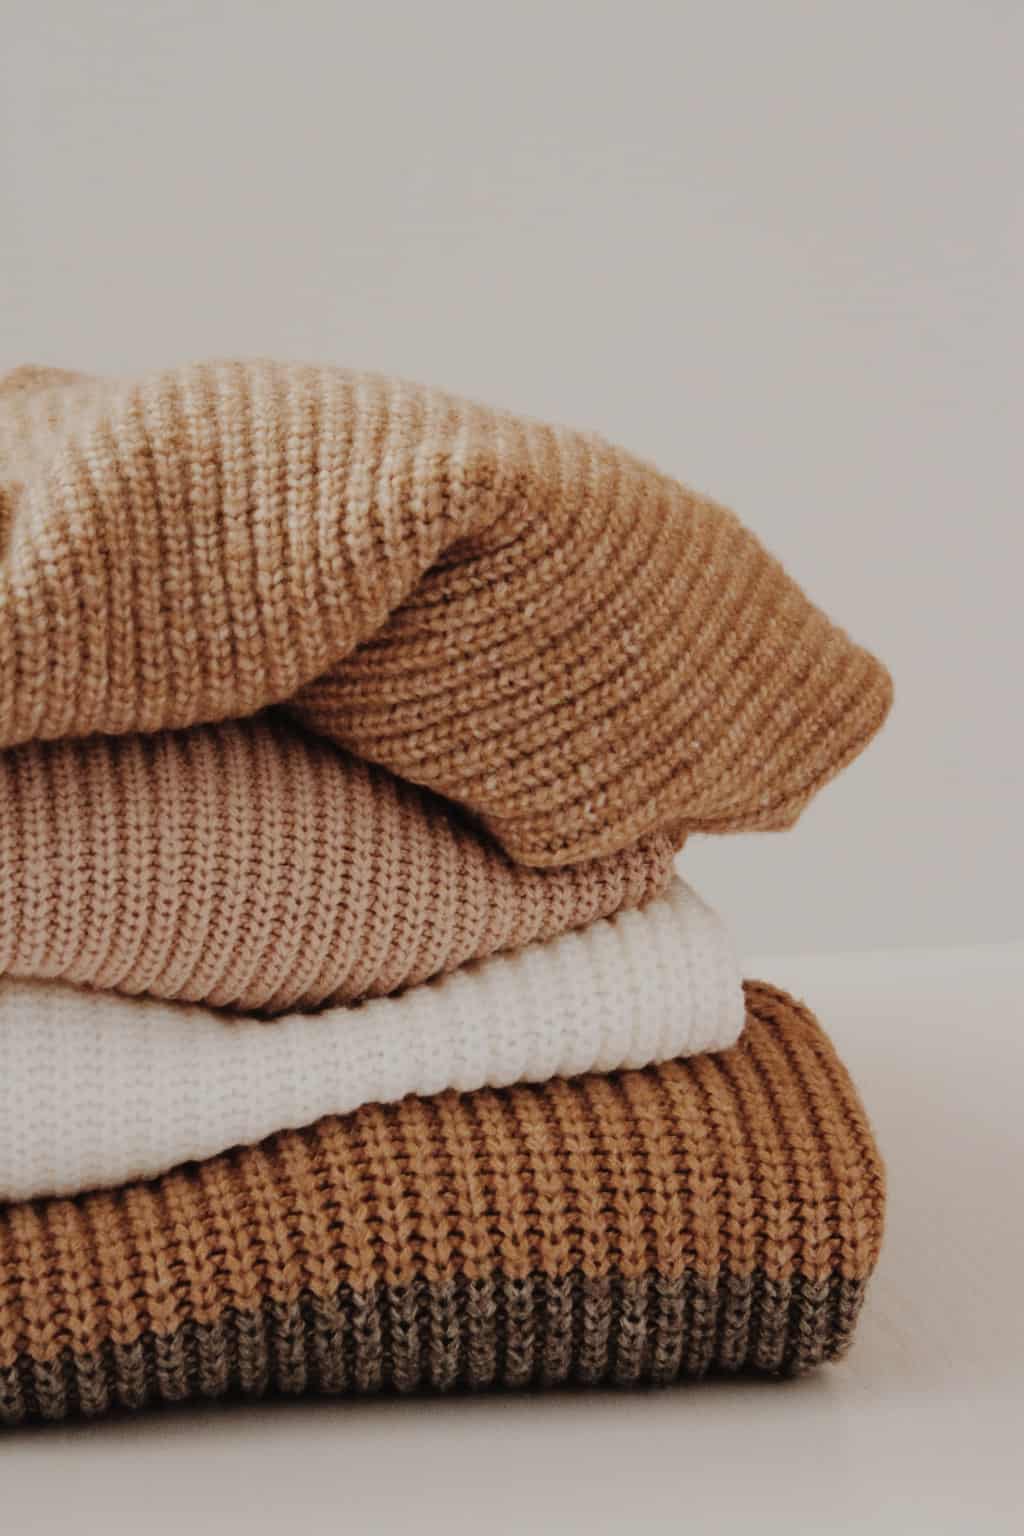 stacks of wool sweaters